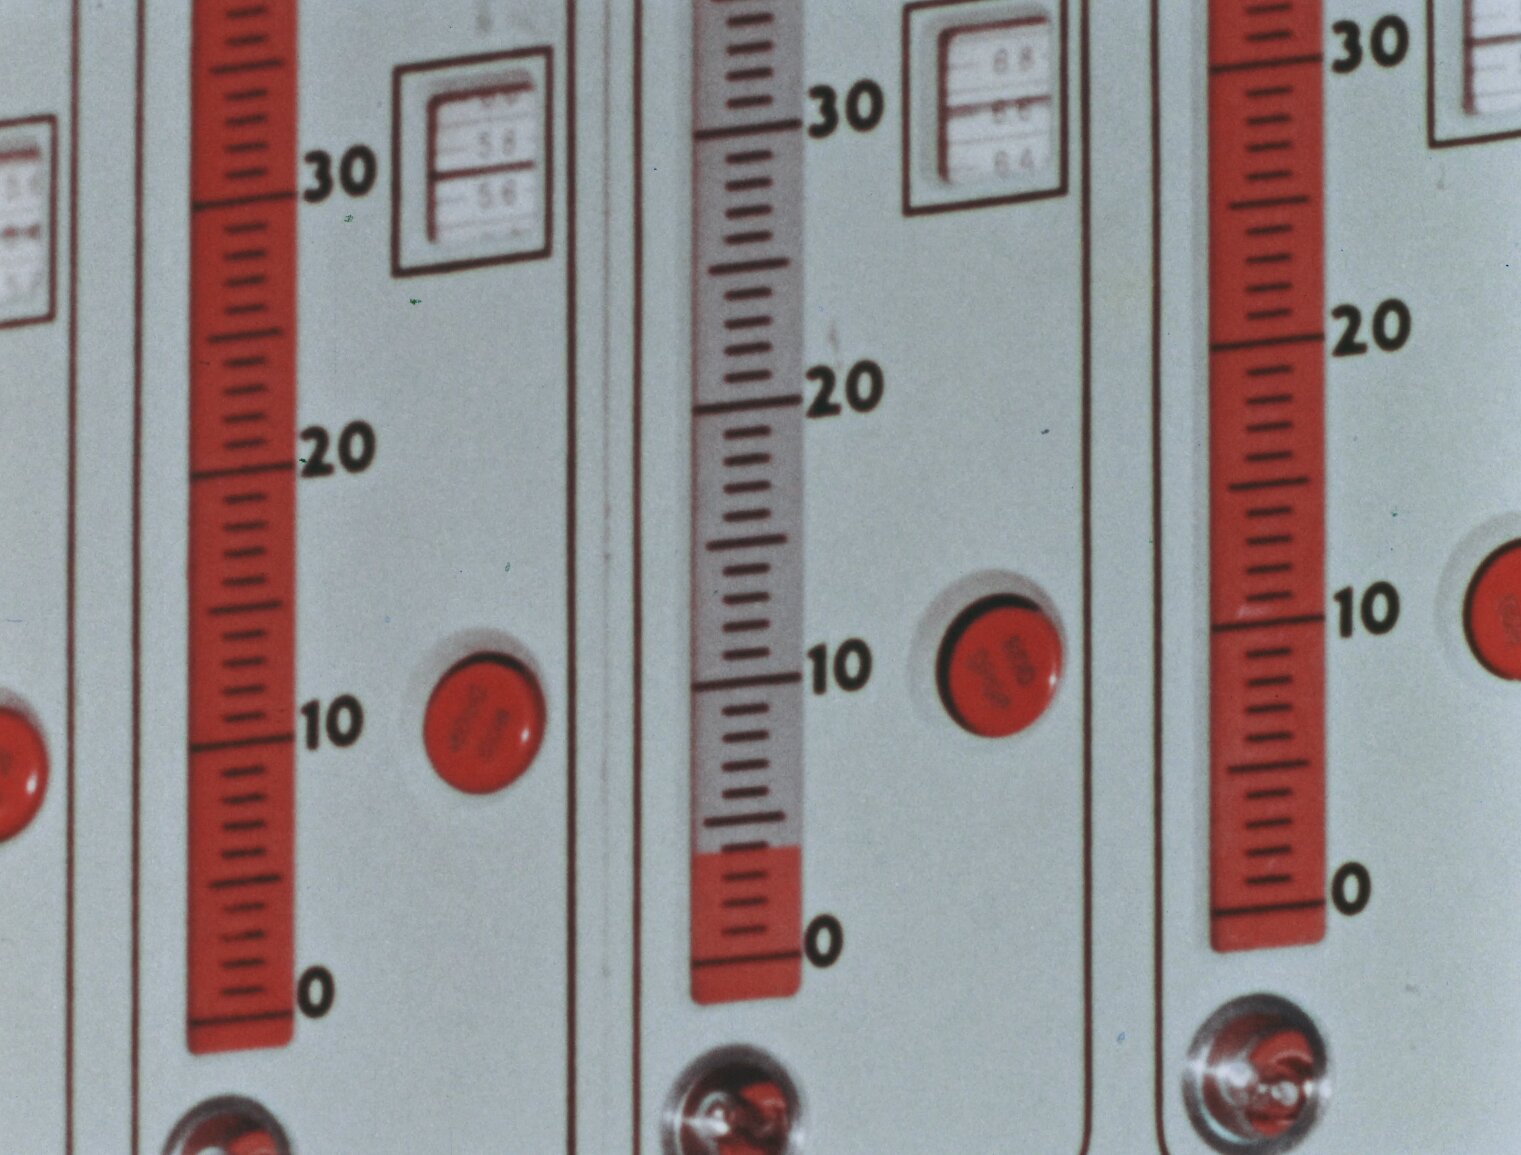 Closeup of control rod position indicators, which are red and white ruler-like indicators with red buttons and indicator lights. There are three of them shown.